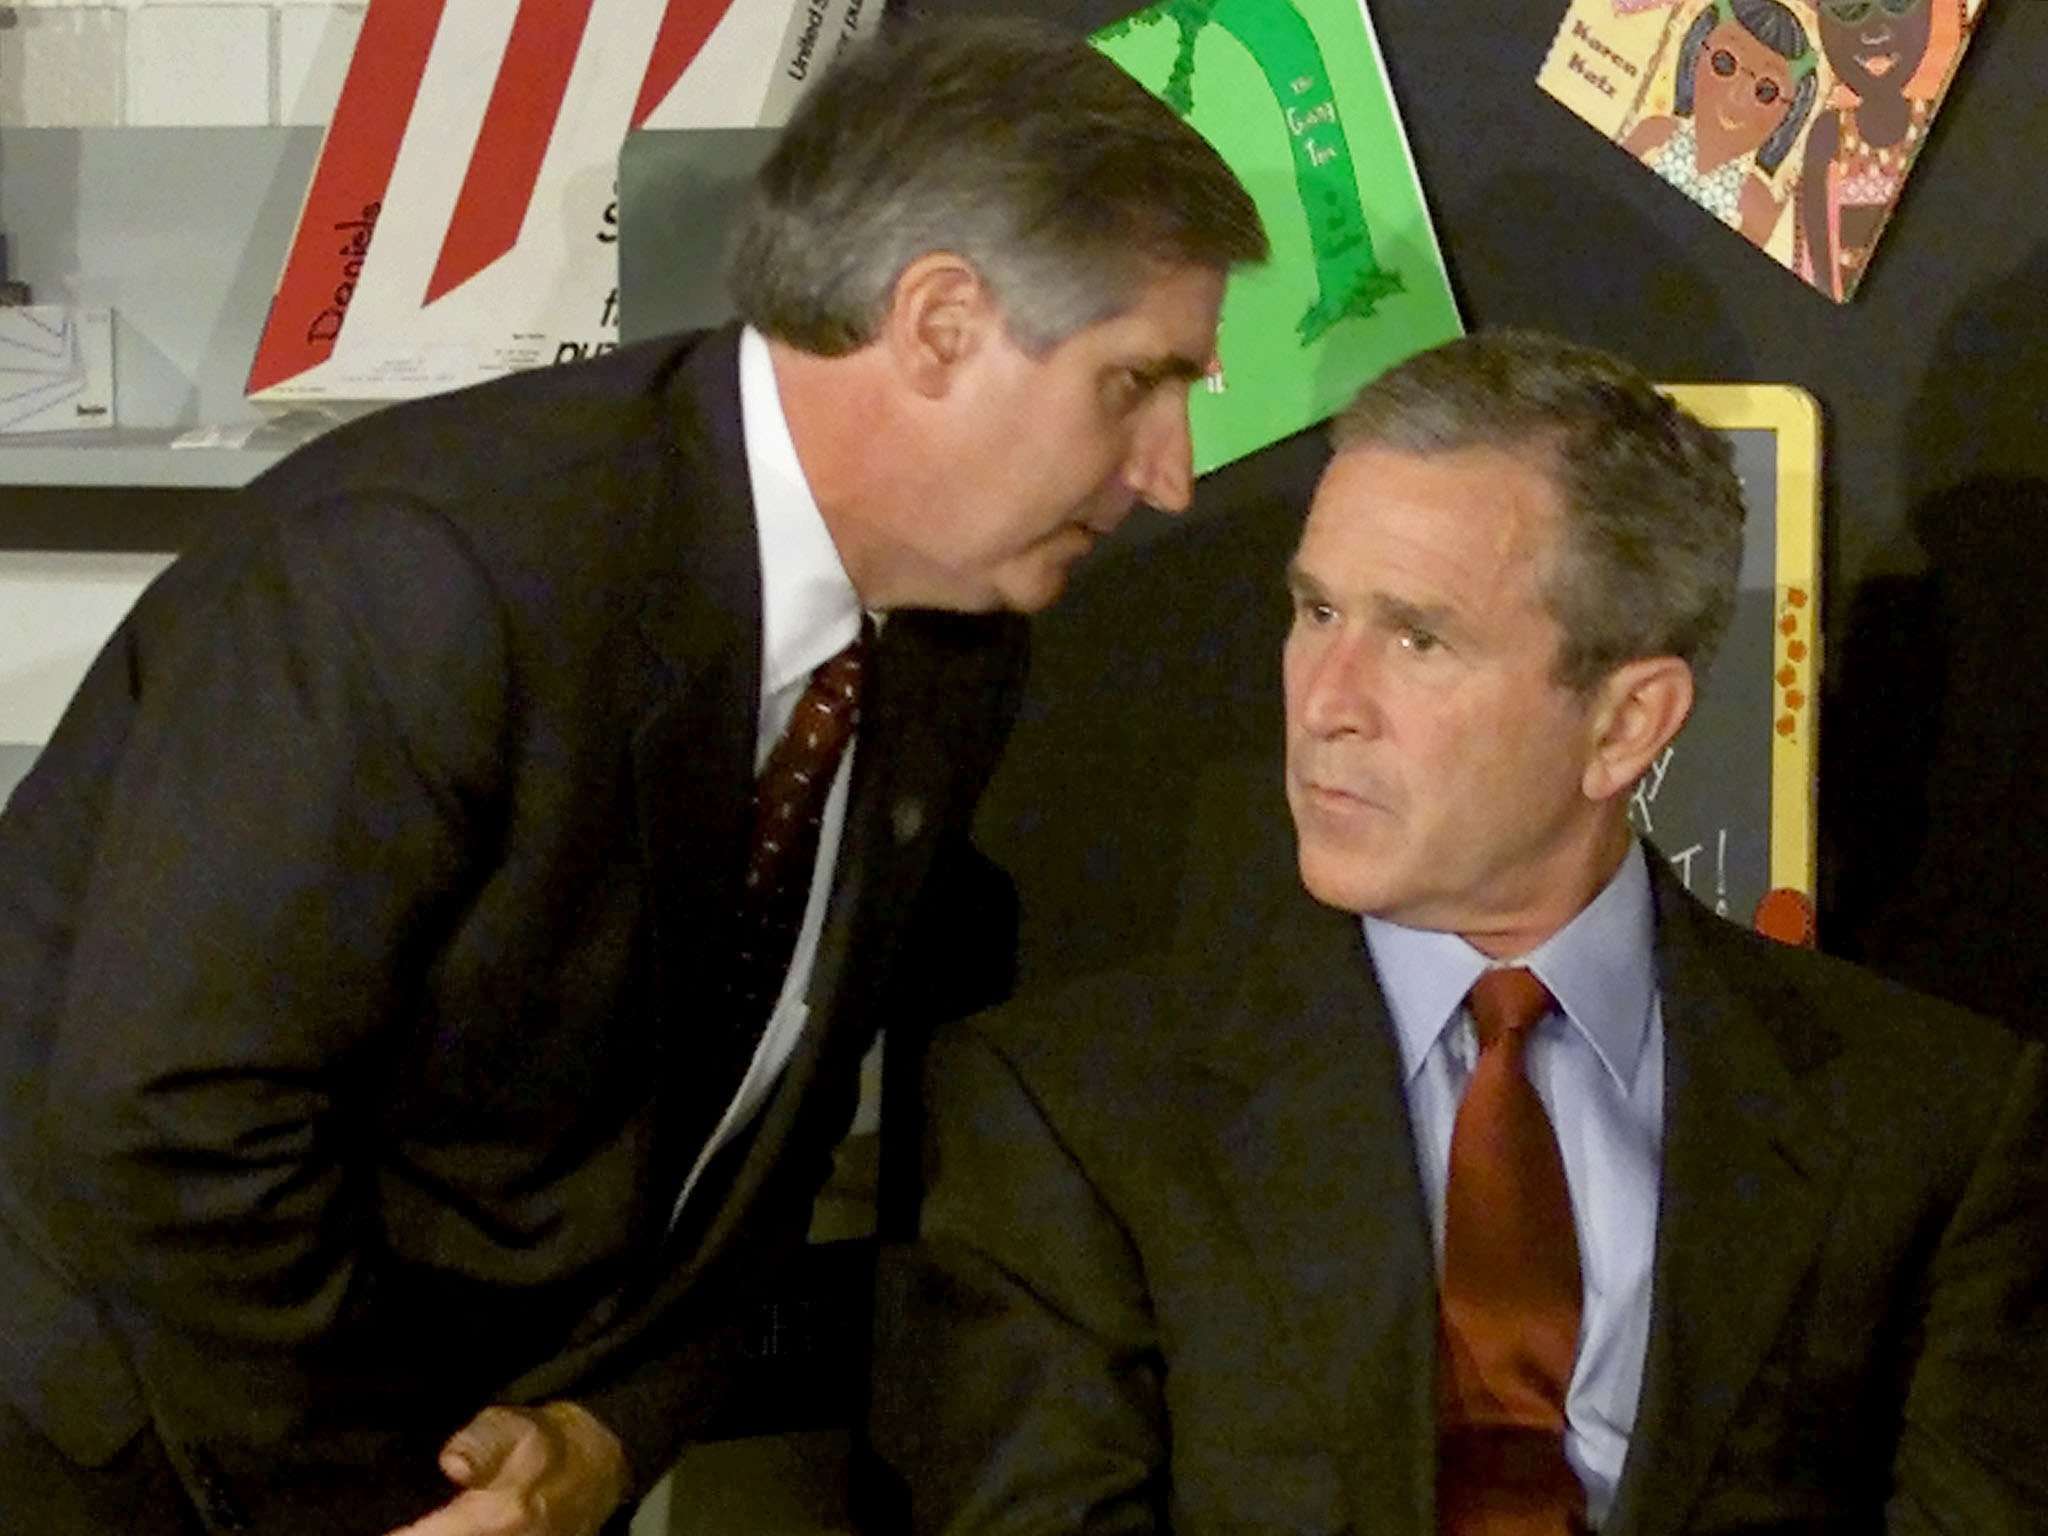 President George W. Bush was at a school event when he was informed. The expression on his face says it all. No one in the government knew how serous the threat was.